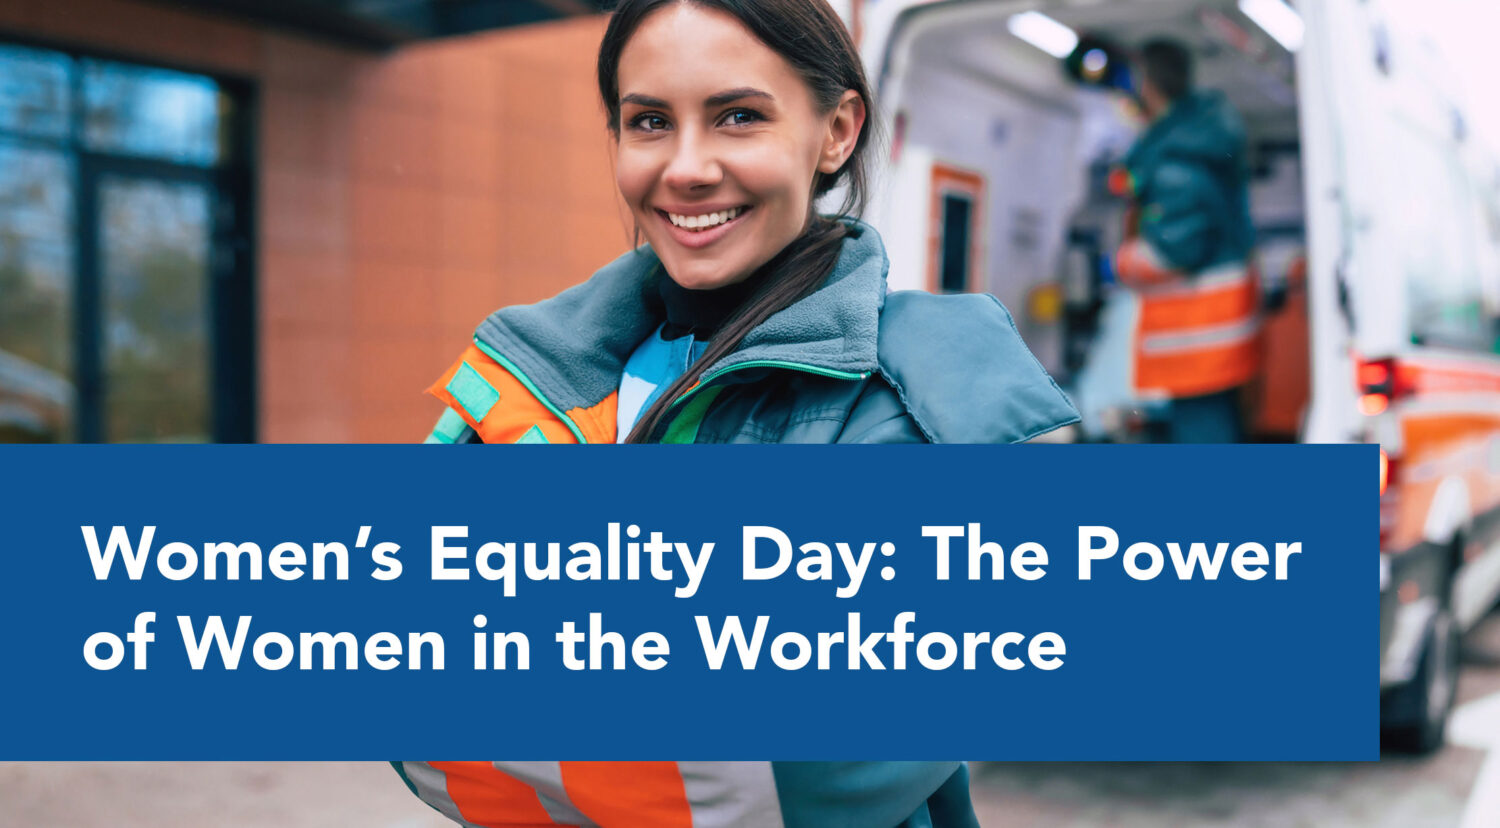 The power of women in the workforce